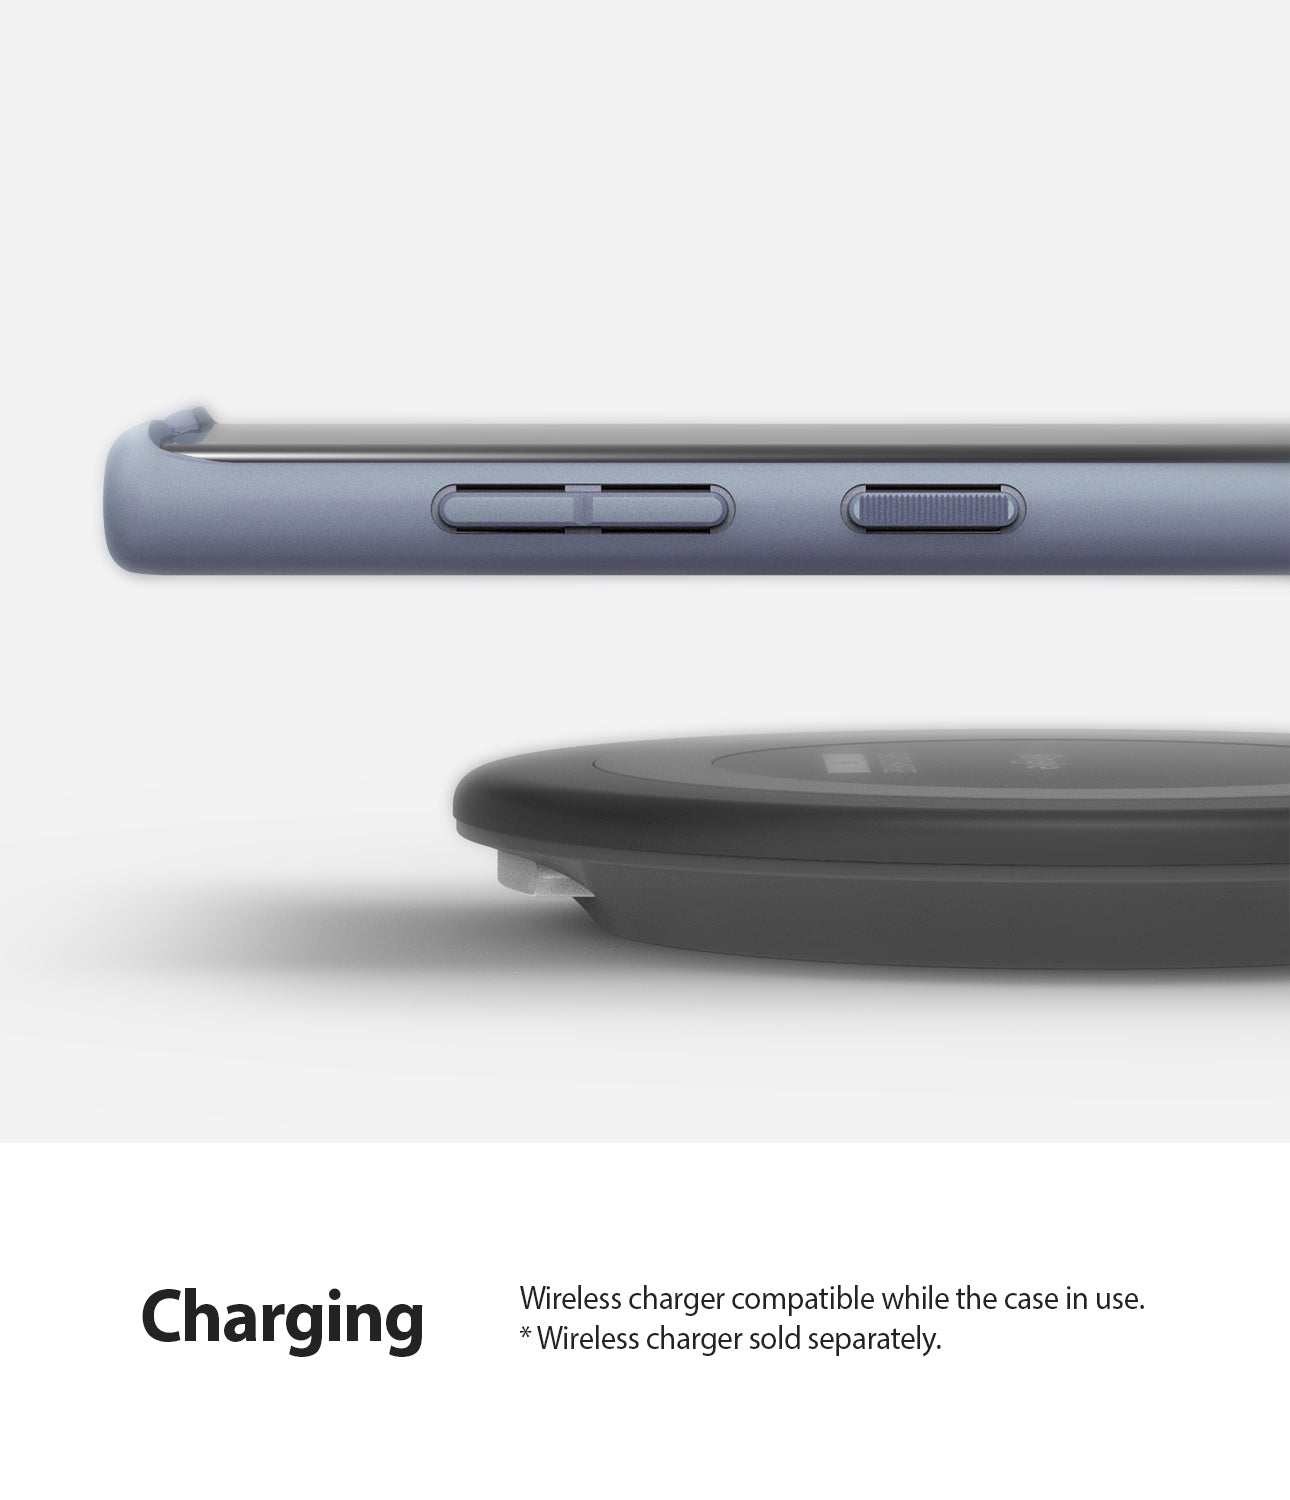 wireless charge and powershare compatible without removing the case